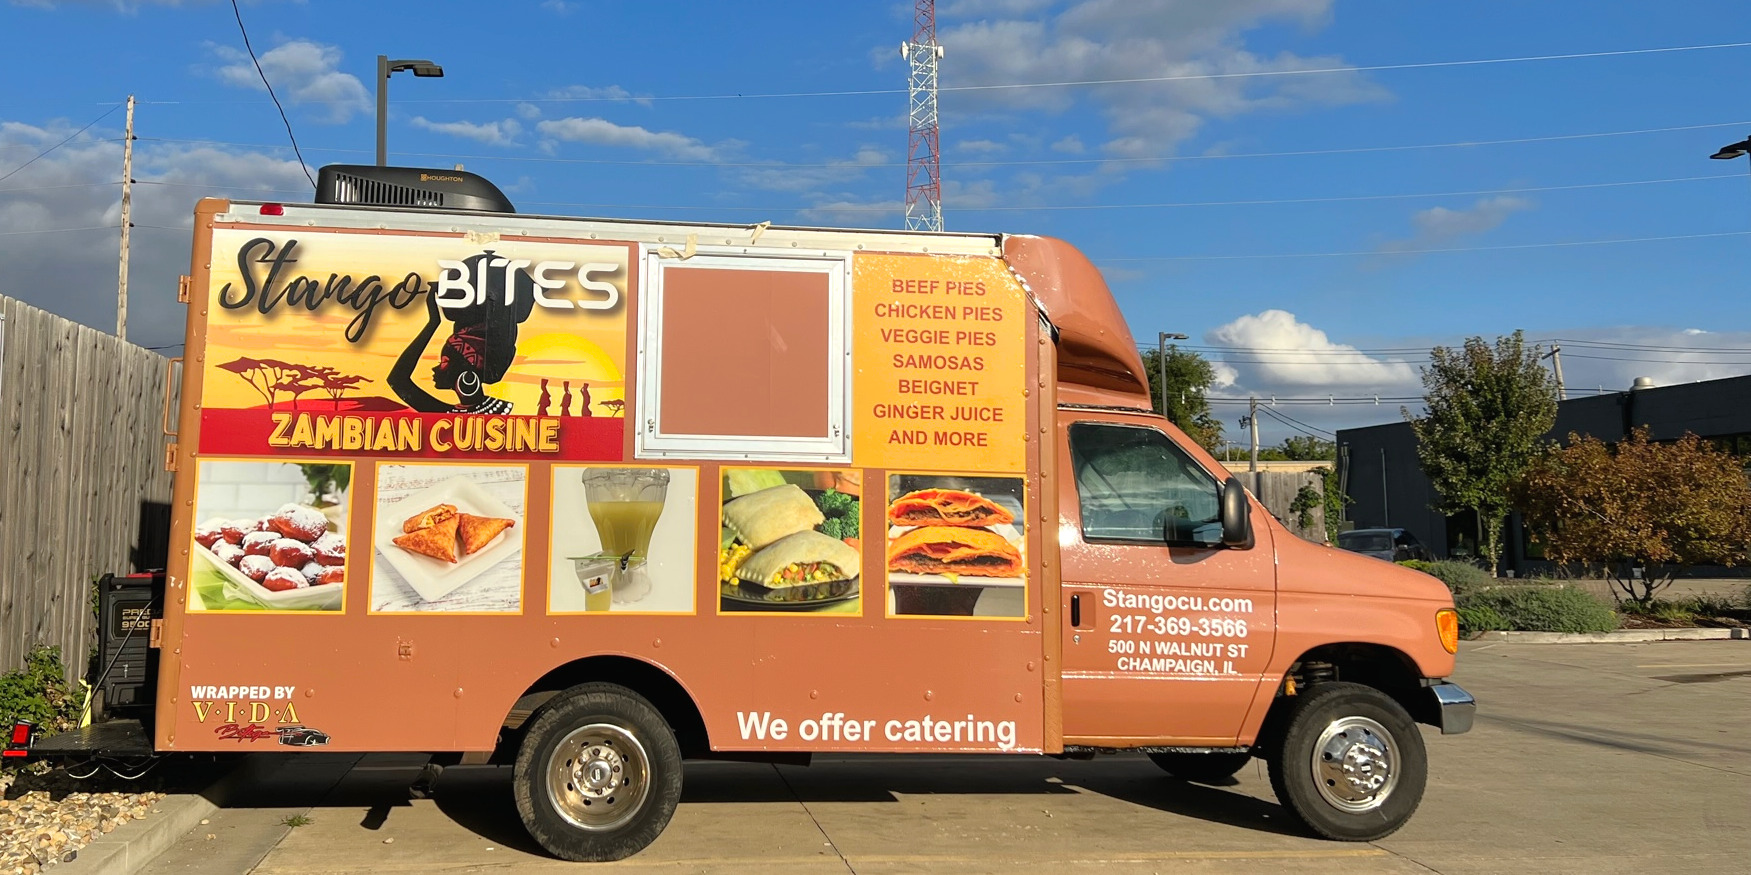 The brand new Stango food truck called Stango Bites, which serves appetizers from the Zambian restaurant in Champaign, Illinois.